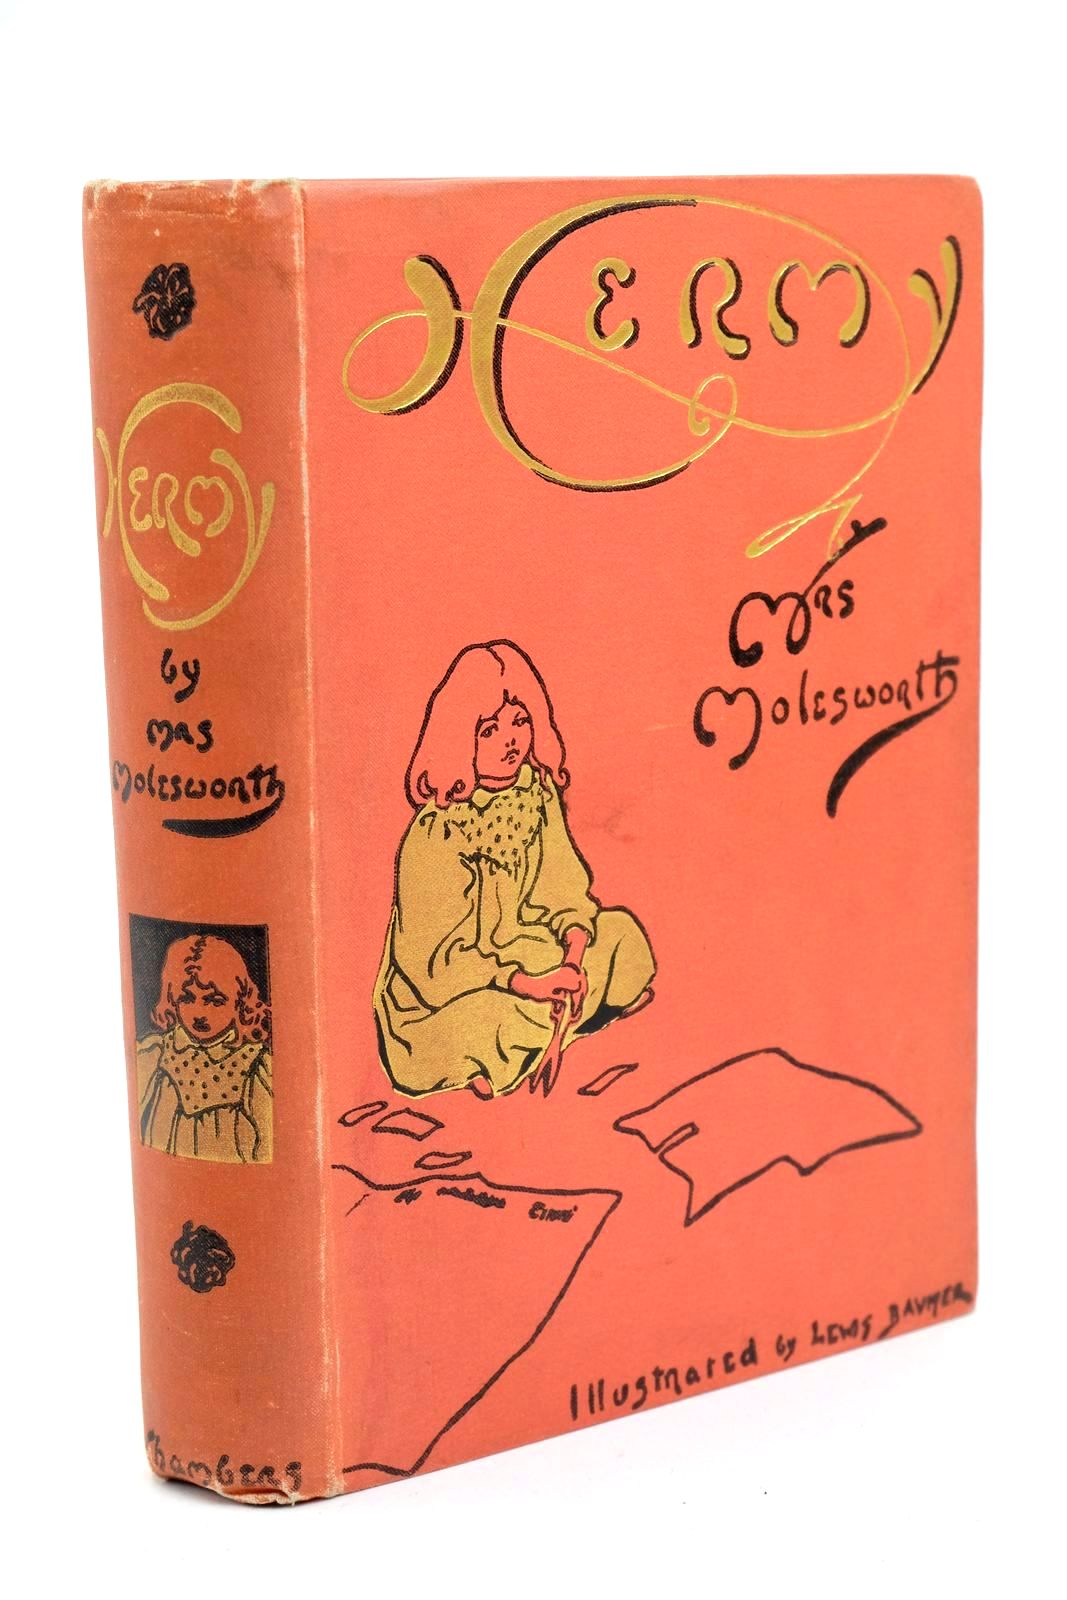 Photo of HERMY - THE STORY OF A LITTLE GIRL written by Molesworth, Mrs. illustrated by Baumer, Lewis published by W. &amp; R. Chambers Limited (STOCK CODE: 1322998)  for sale by Stella & Rose's Books